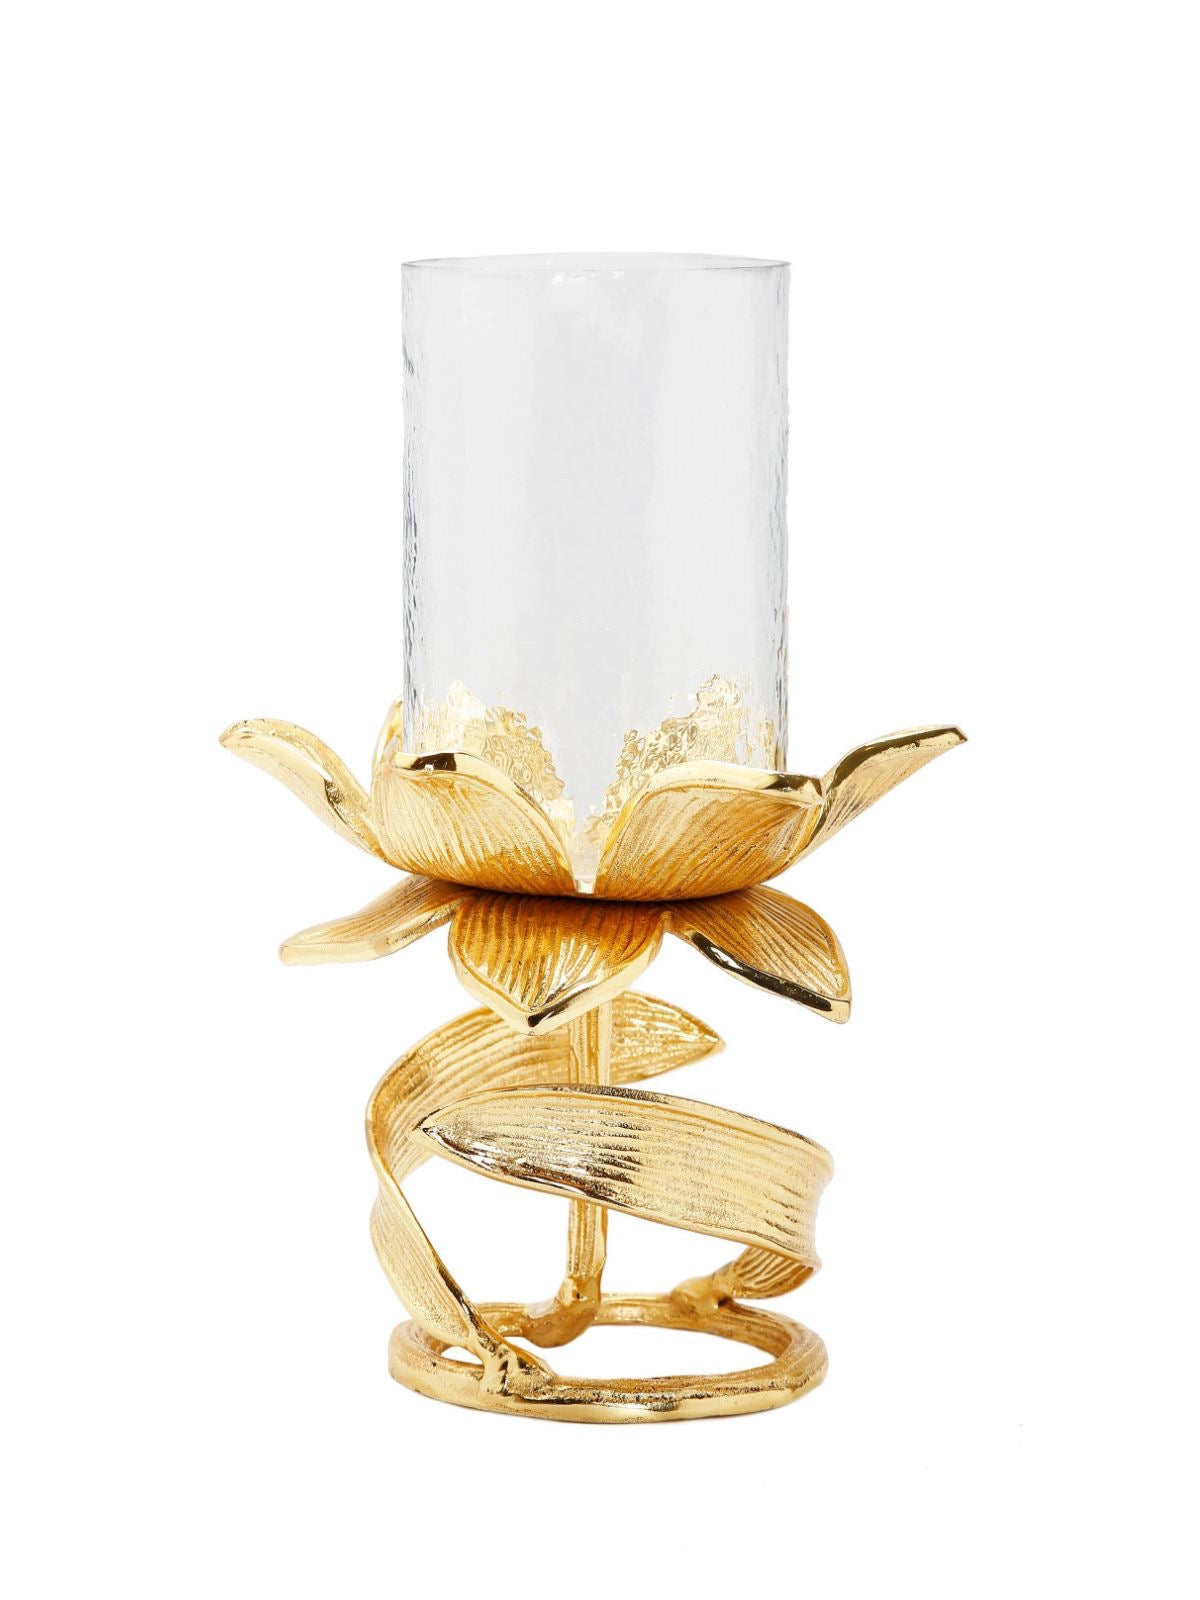 11.8H Hammered Glass Candle Holders on Gold Stainless Steel Floral Stand. Sold by KYA Home Decor.